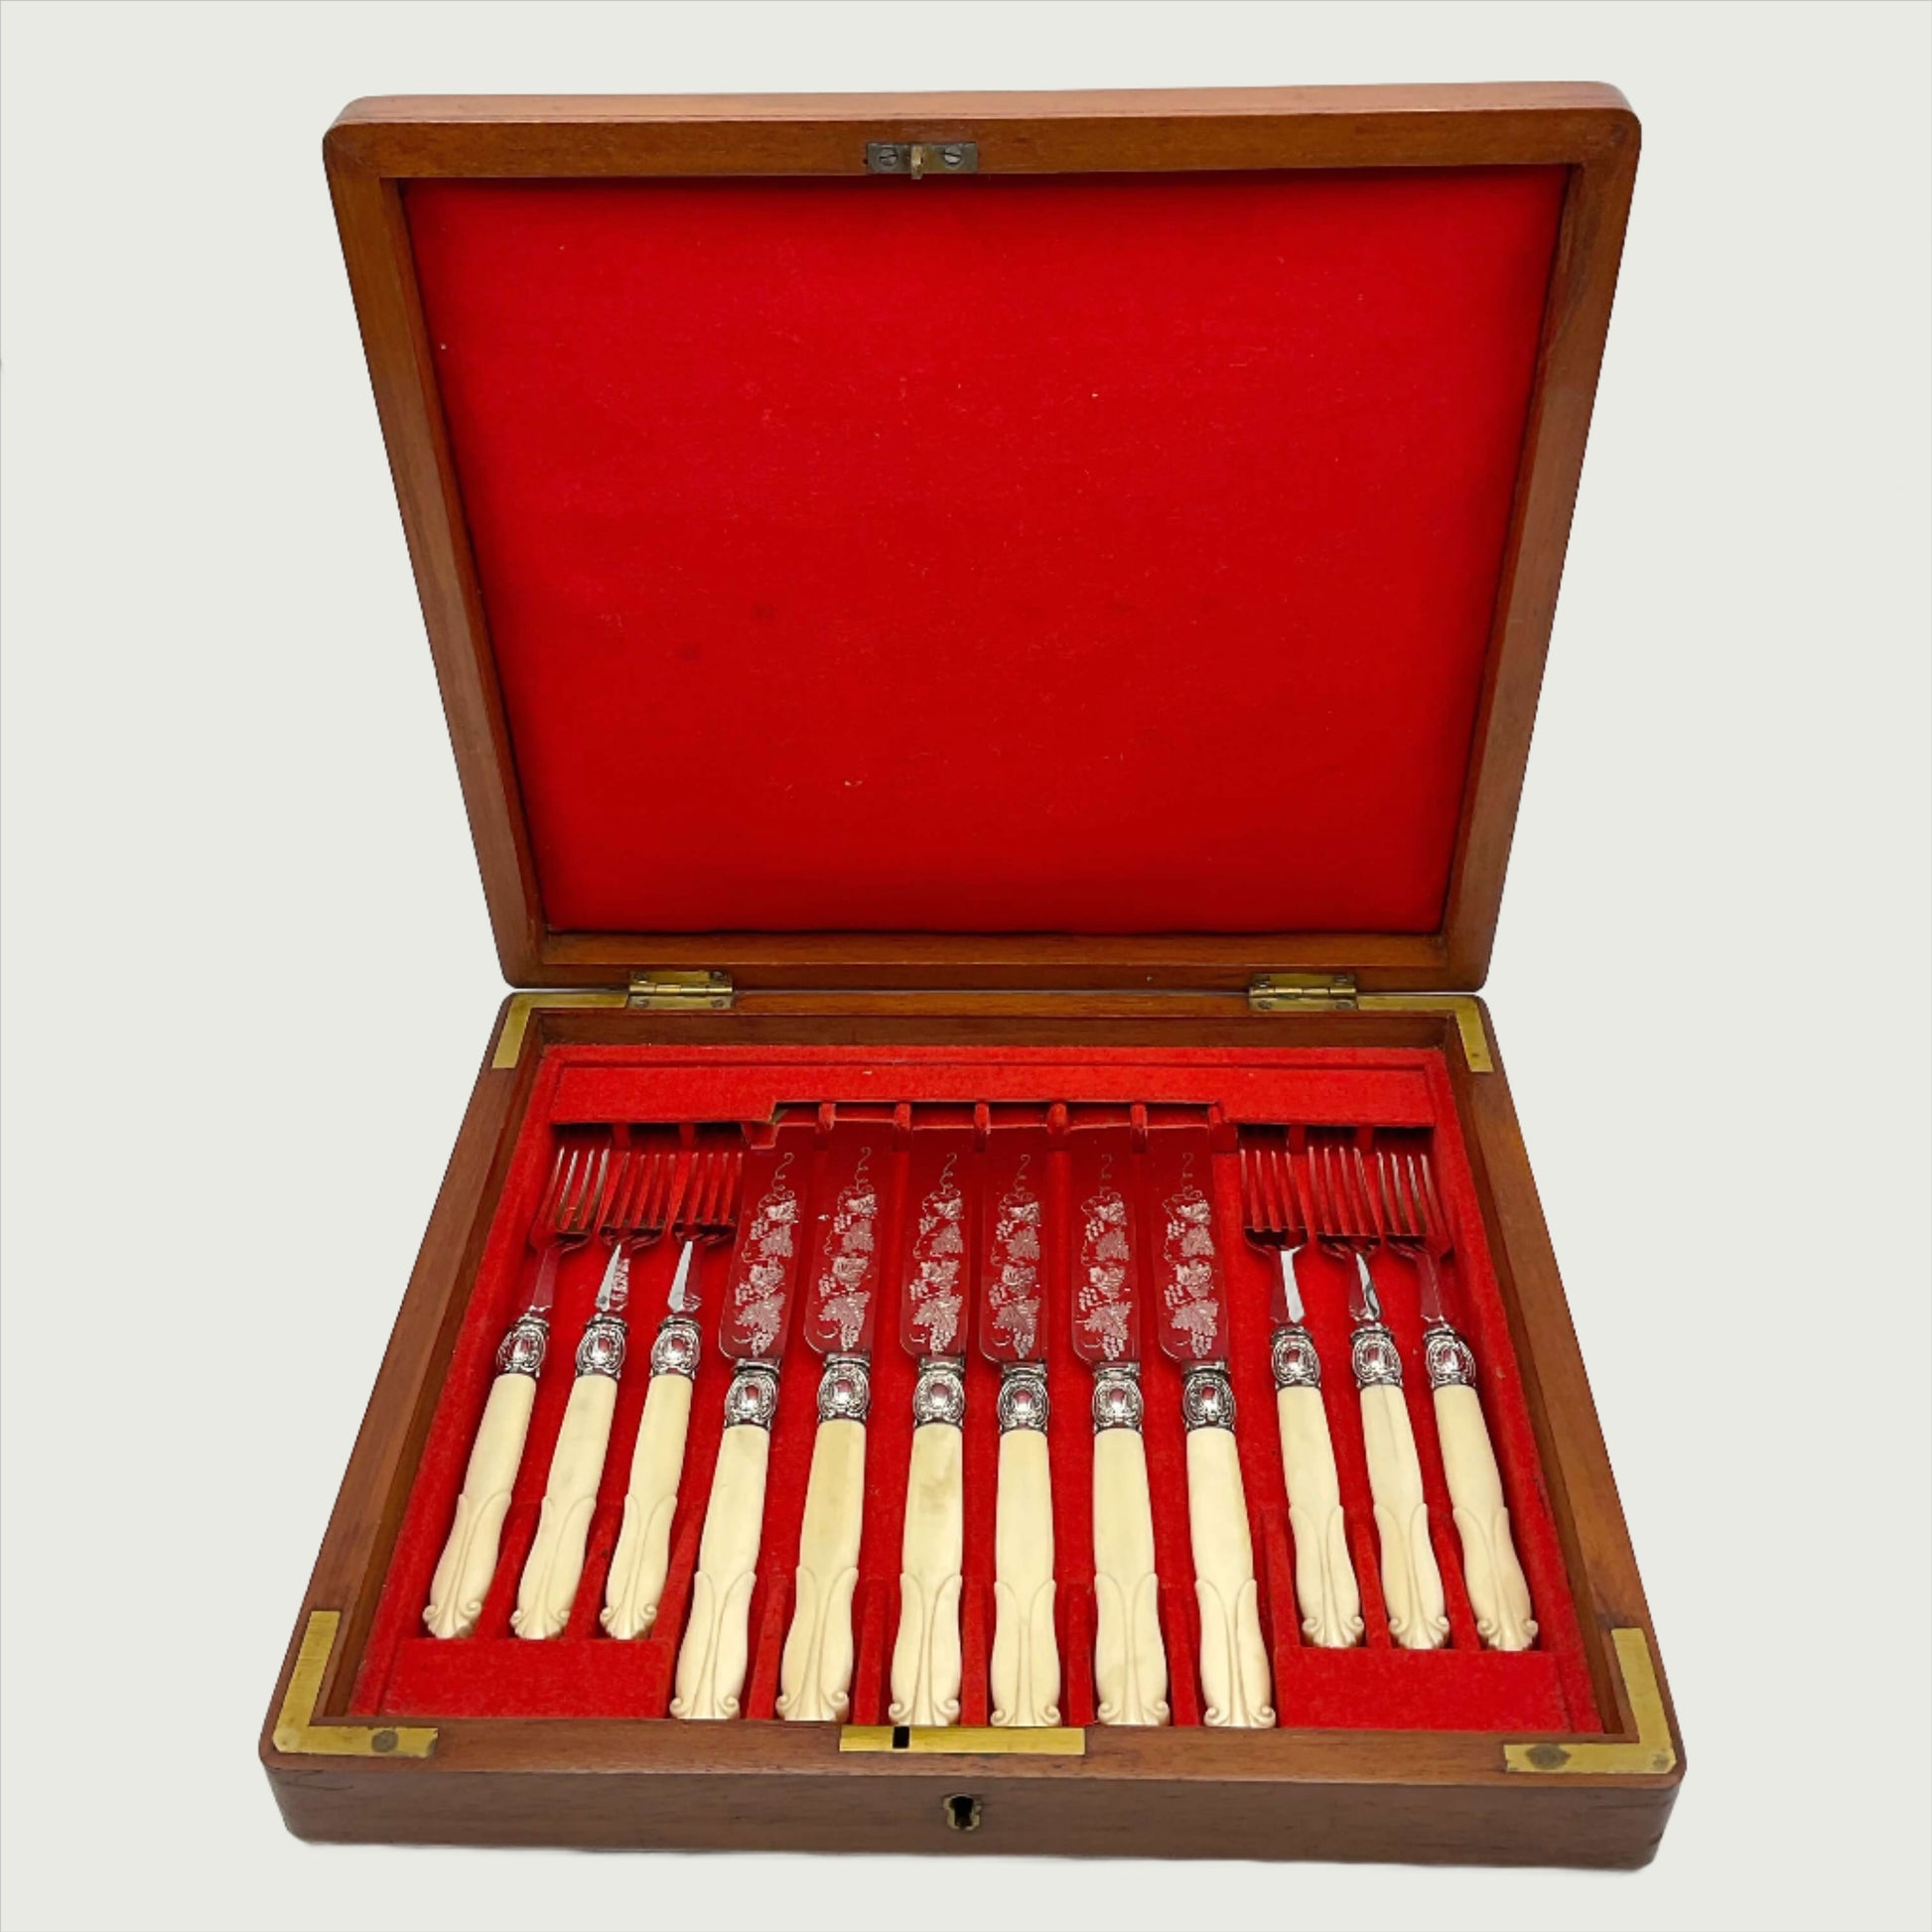 Antique silver plated dessert knives and forks with bone handles in a red lined wooden presentation box